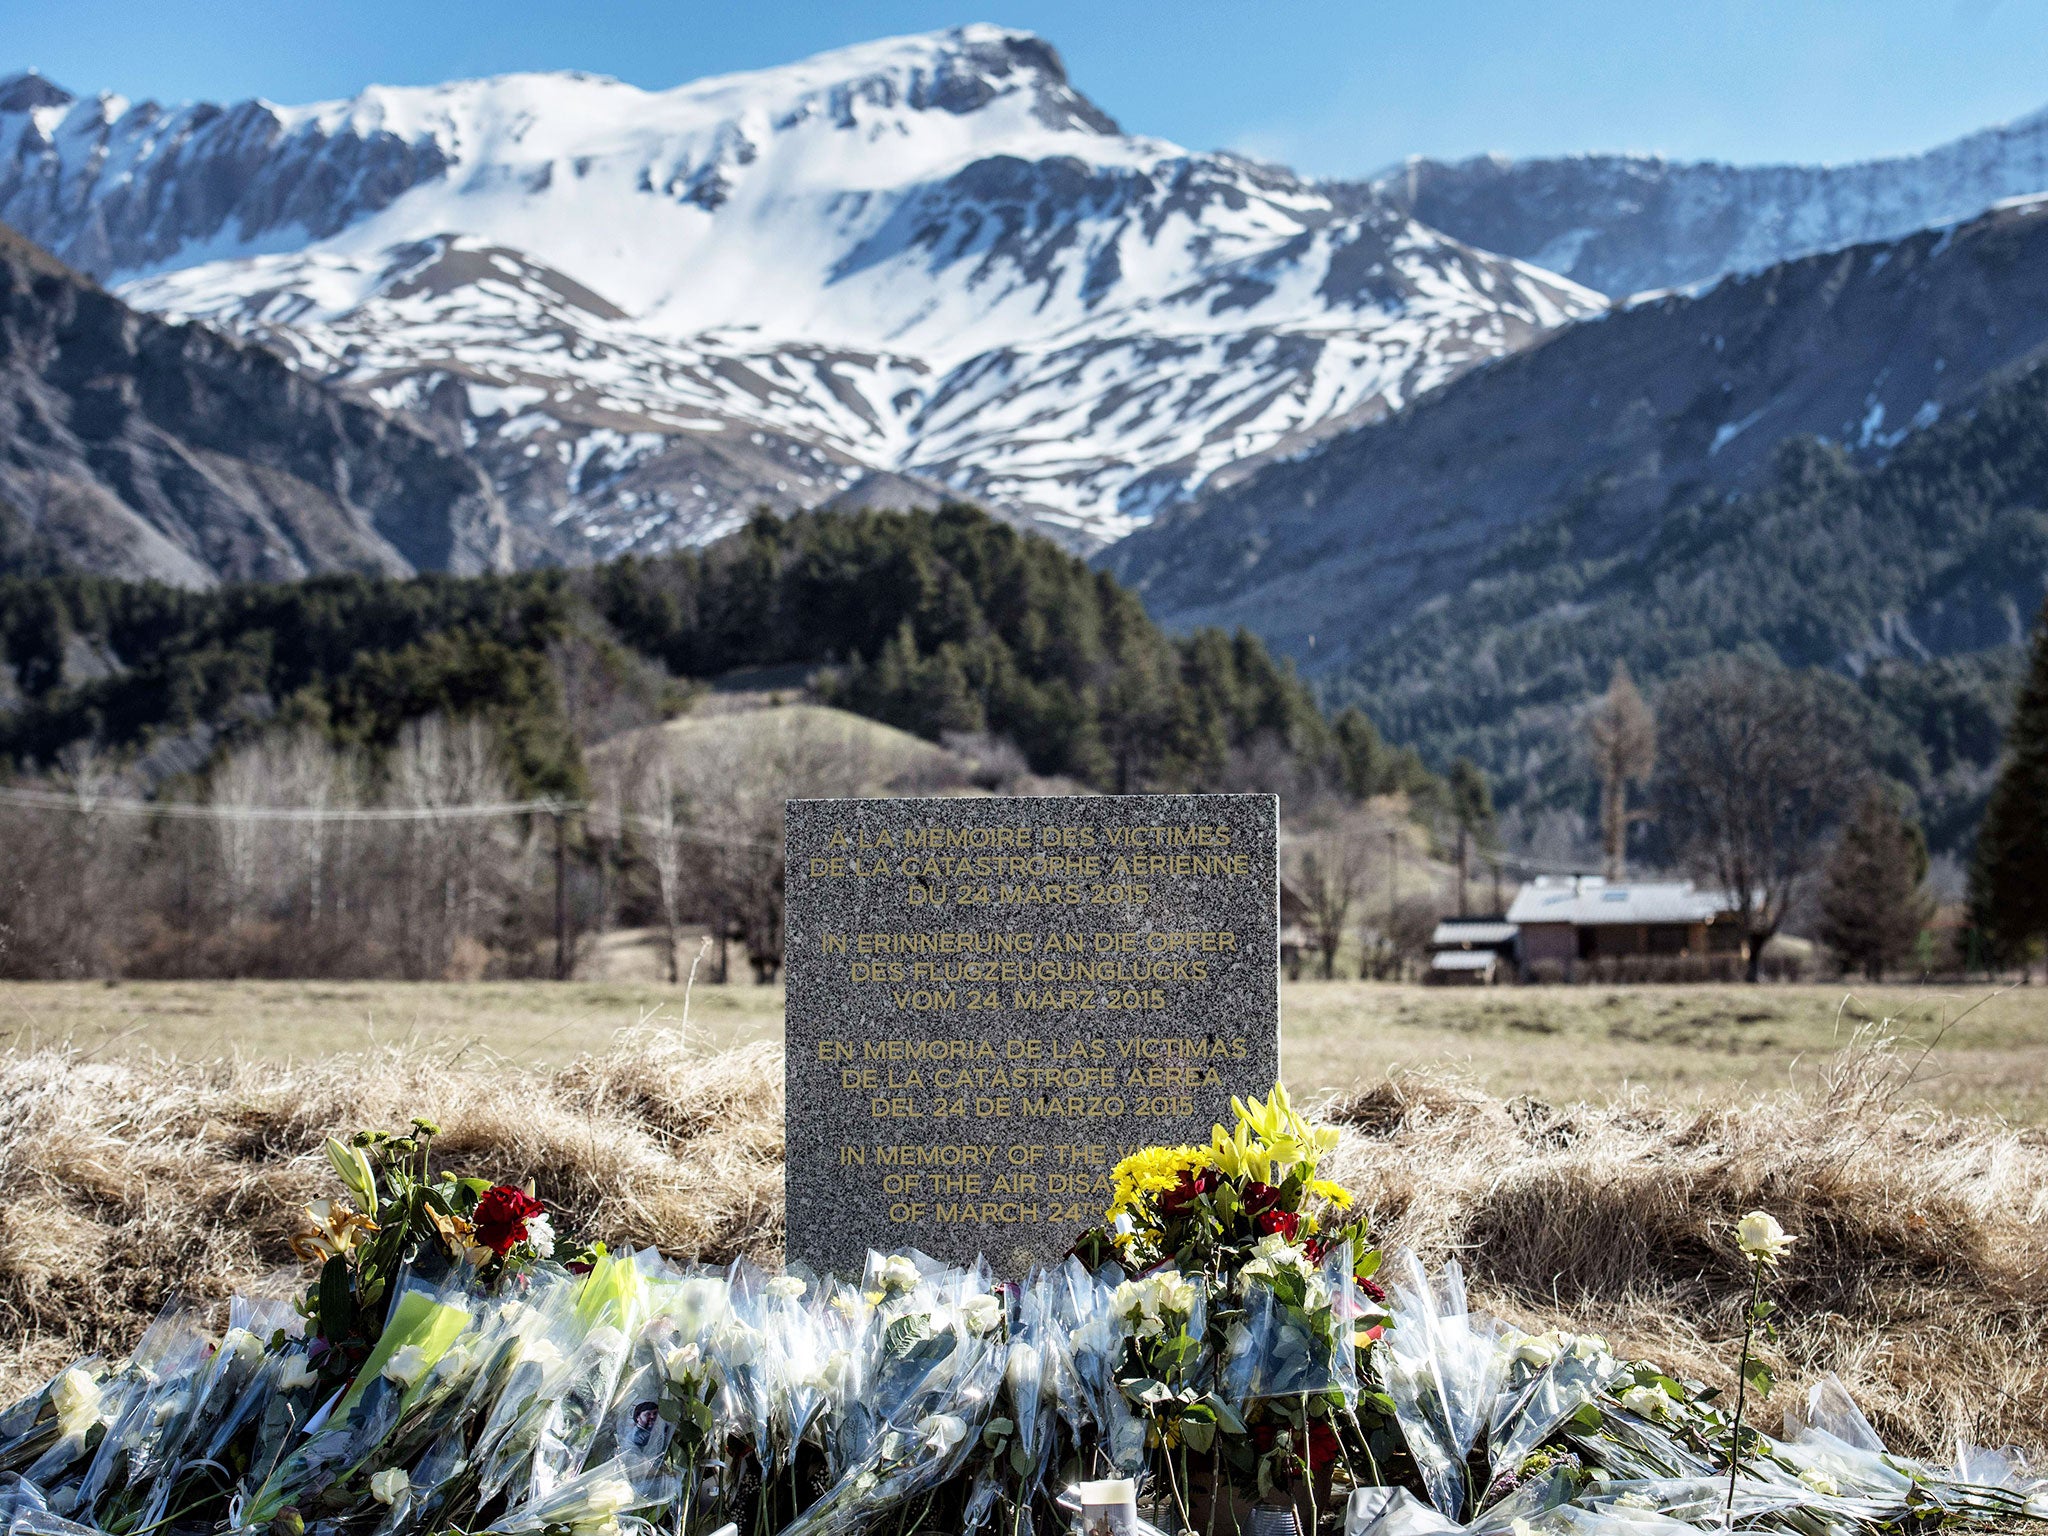 A stele in memory of the victims of the Germanwings Airbus A320 crash is pictured in the small village of Le Vernet, French Alps, near the site where a Airbus A320 crashed on 24 March